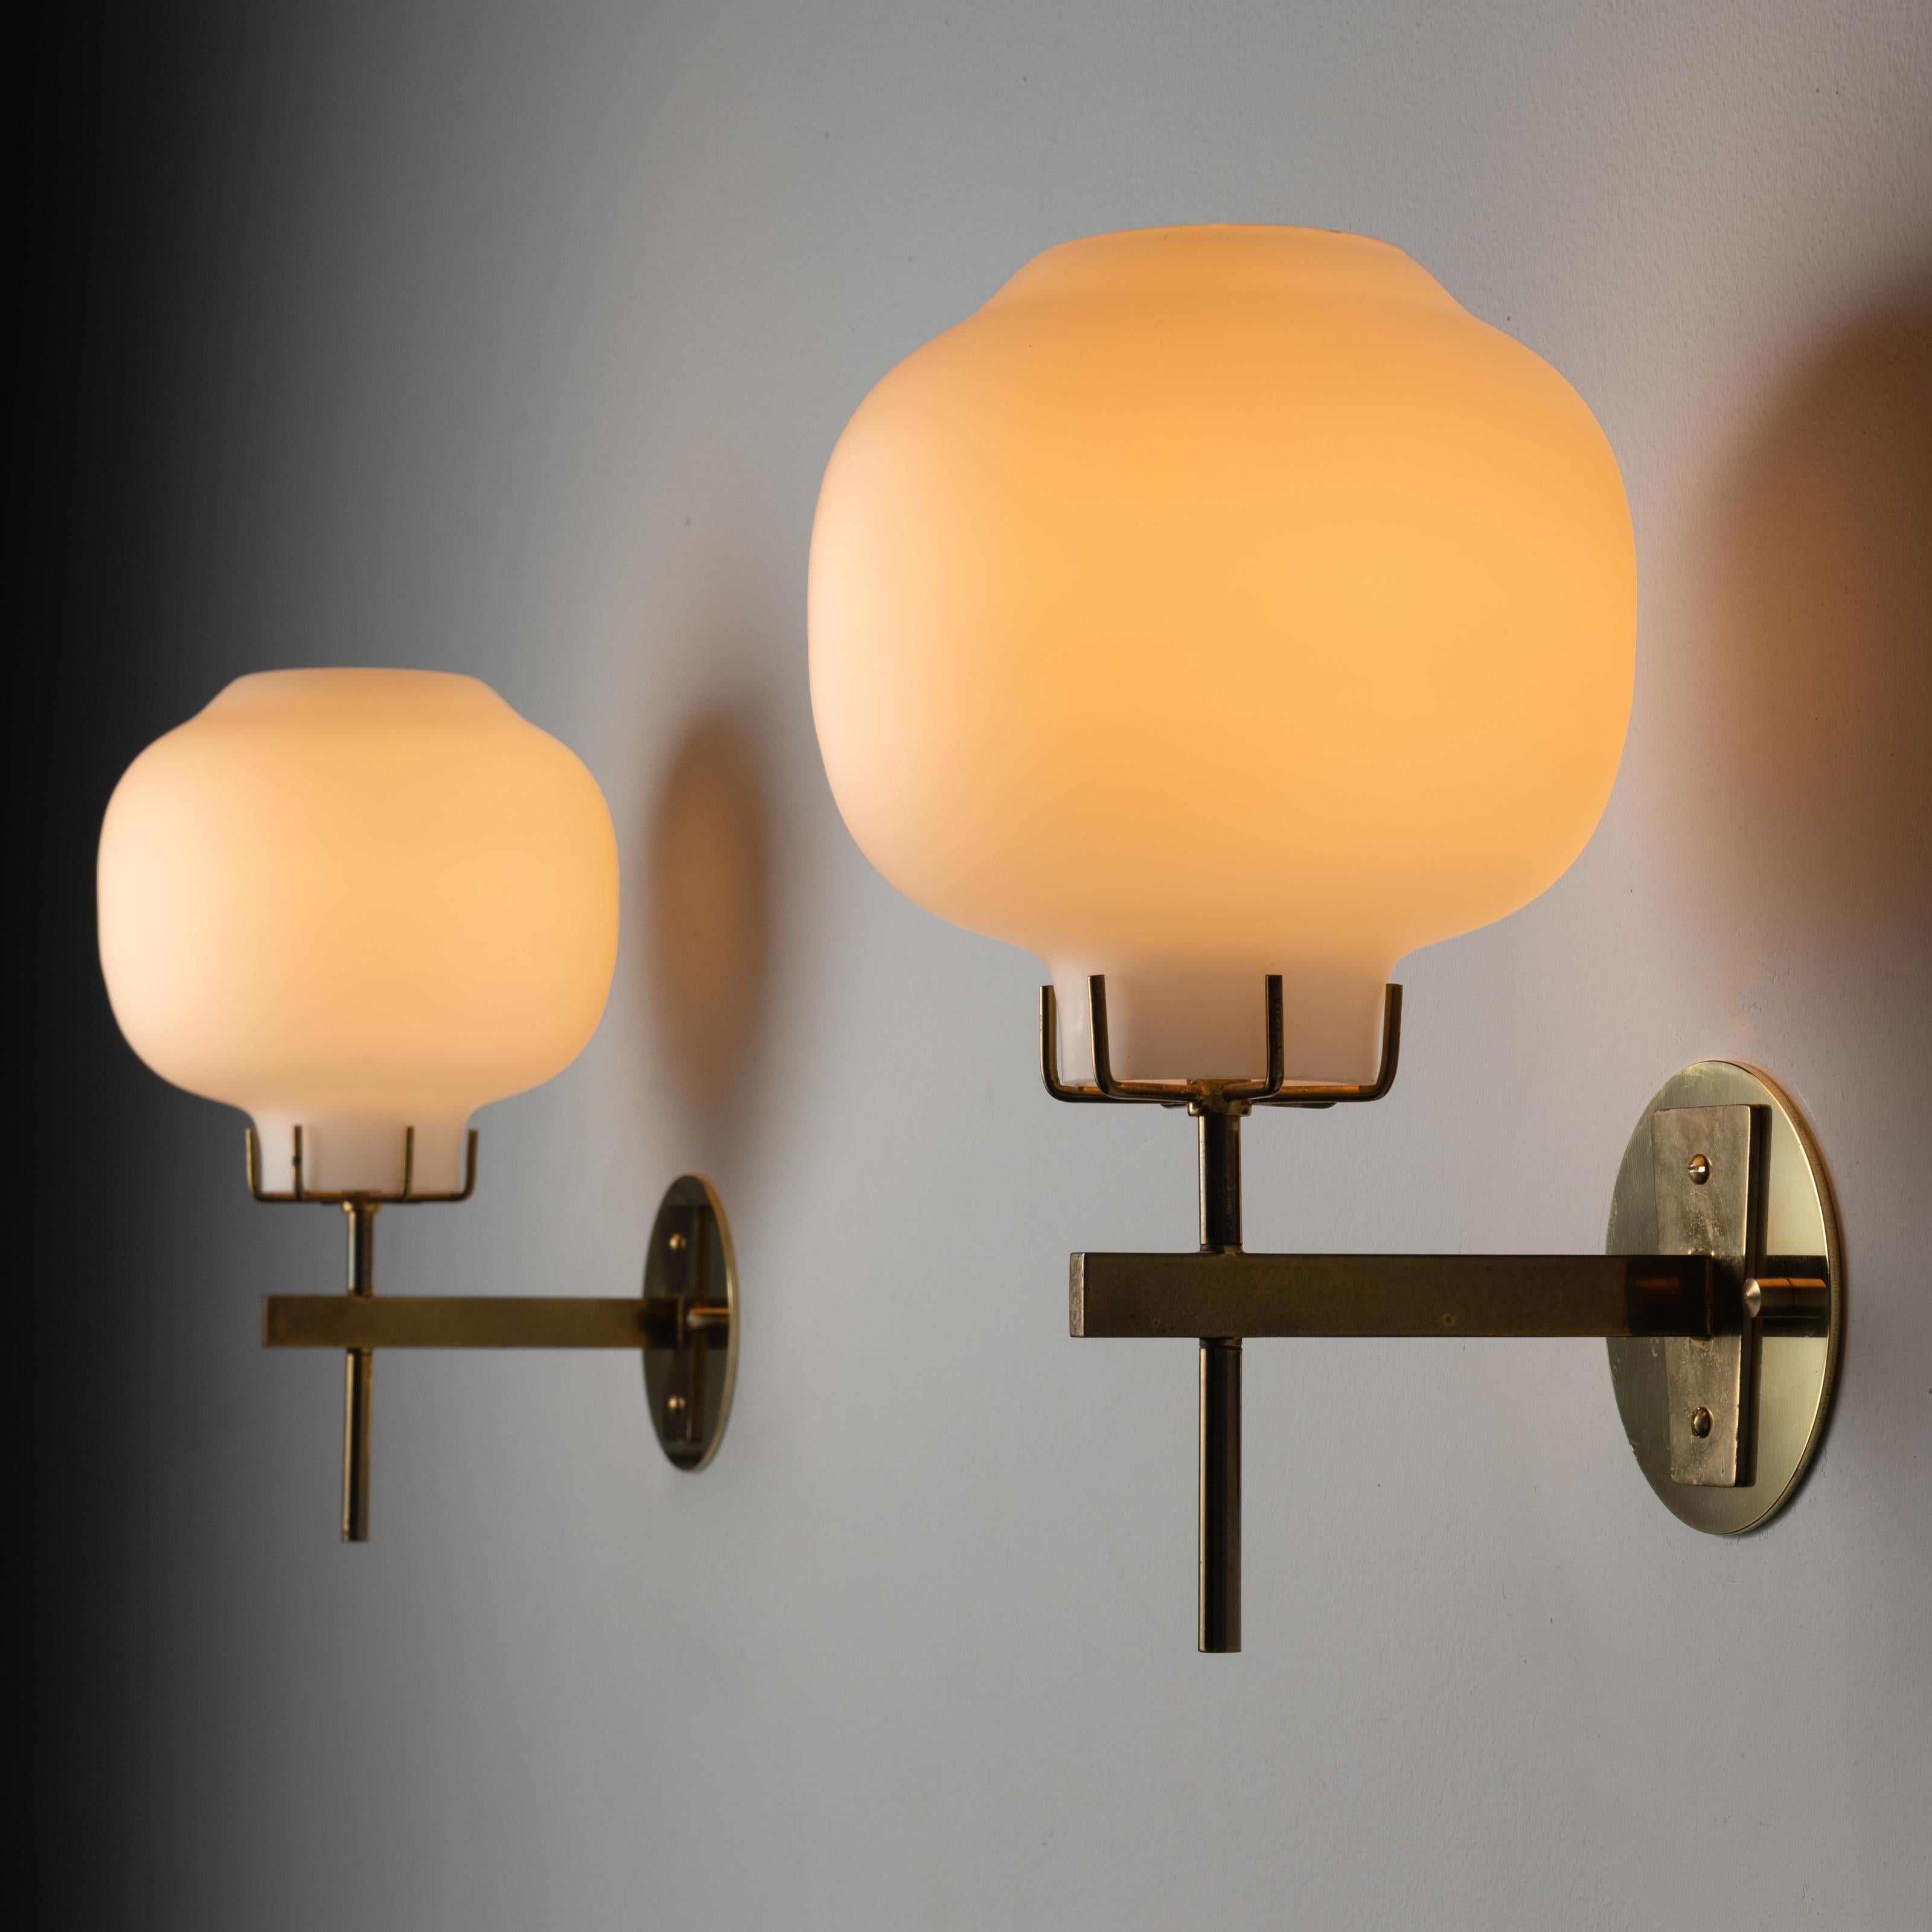 Pair of Sconces by Stilnovo. Designed and manufactured in Italy, circa the 1960s. An opal glass orb is nested onto a brass fixture stem. Brass has been aged throughout. Custom backplate for US applications. Wired for US standards. Each sconce takes